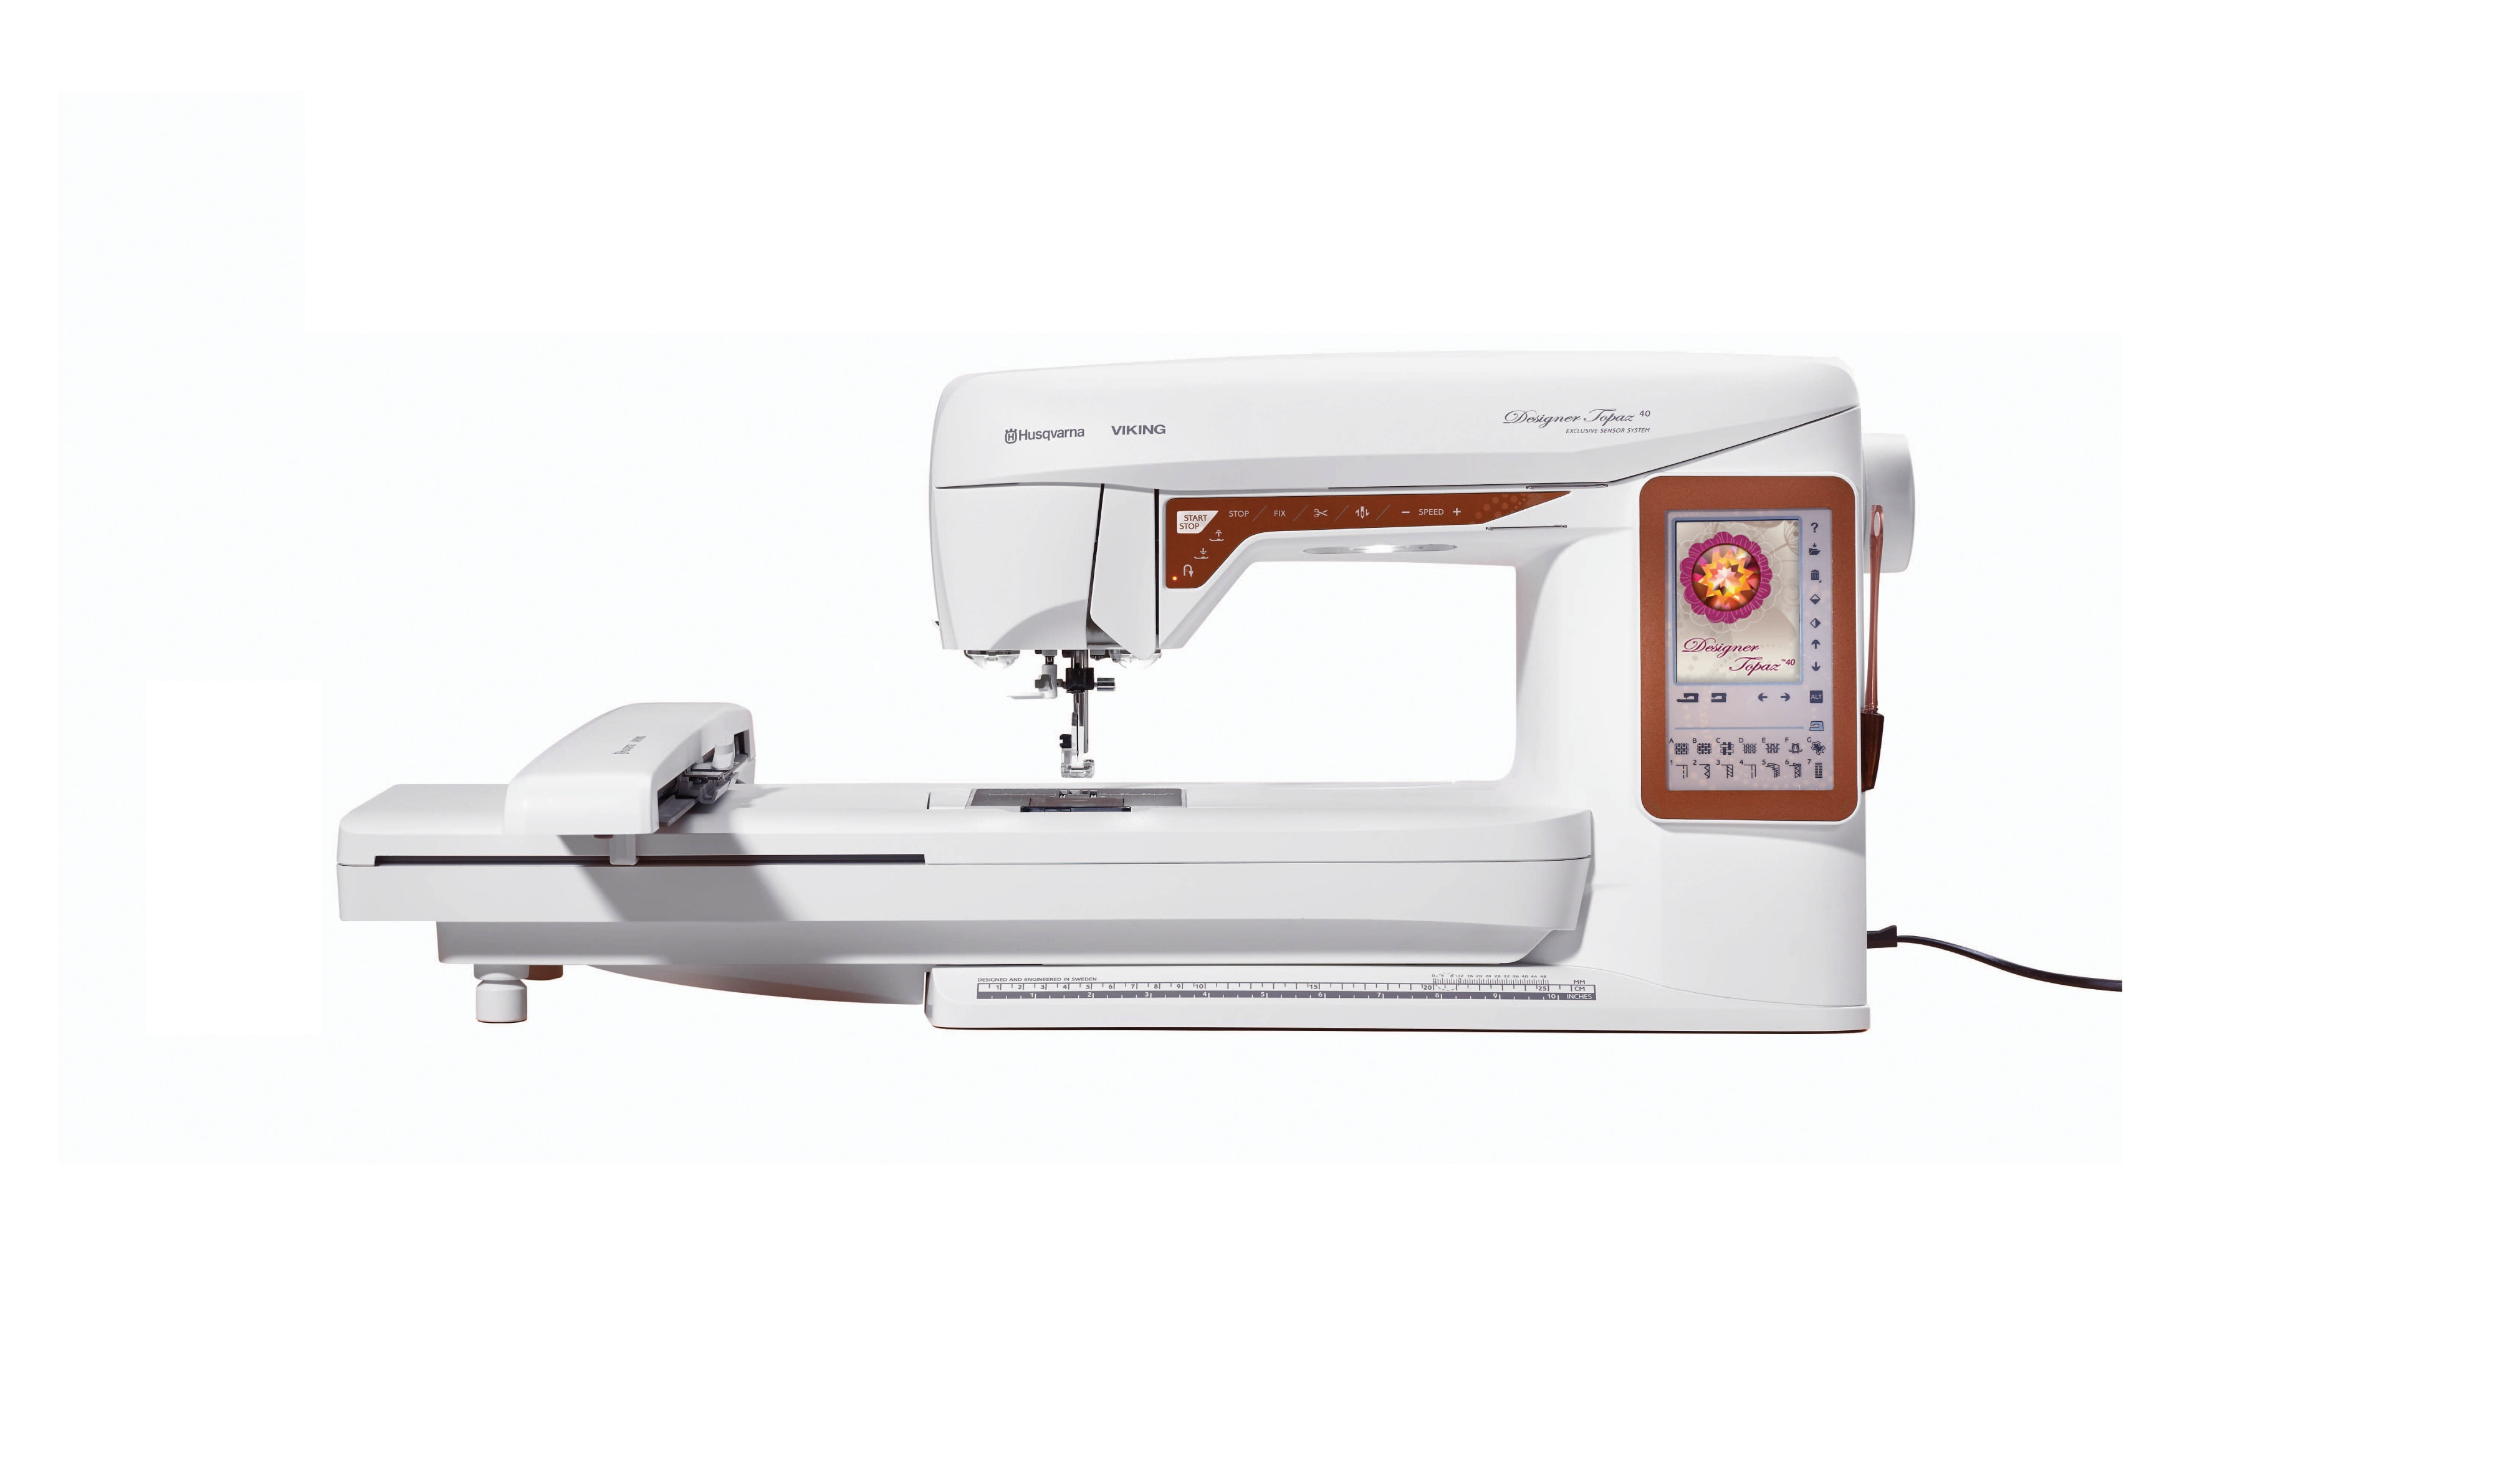 Husqvarna Viking Designer Topaz 40 Sewing and Embroidery Machine for Sale at World Weidner